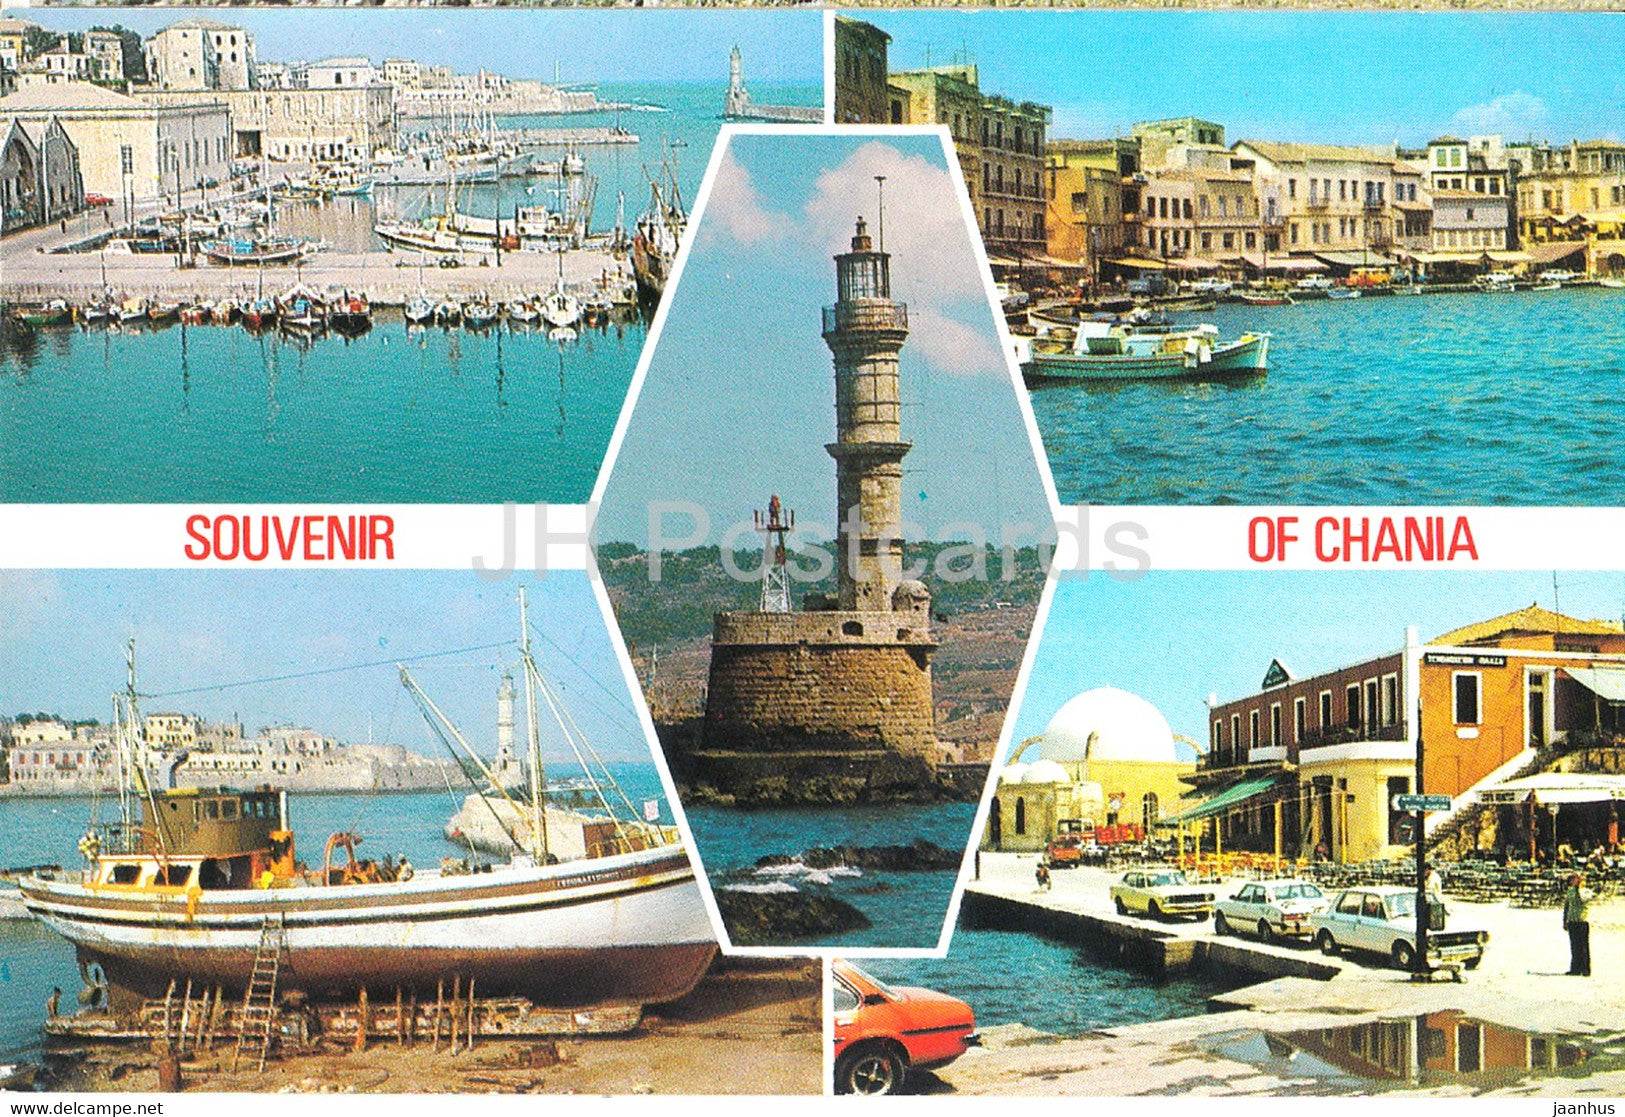 Souvenir of Chania - lighthouse - boat - multiview - Greece - unused - JH Postcards